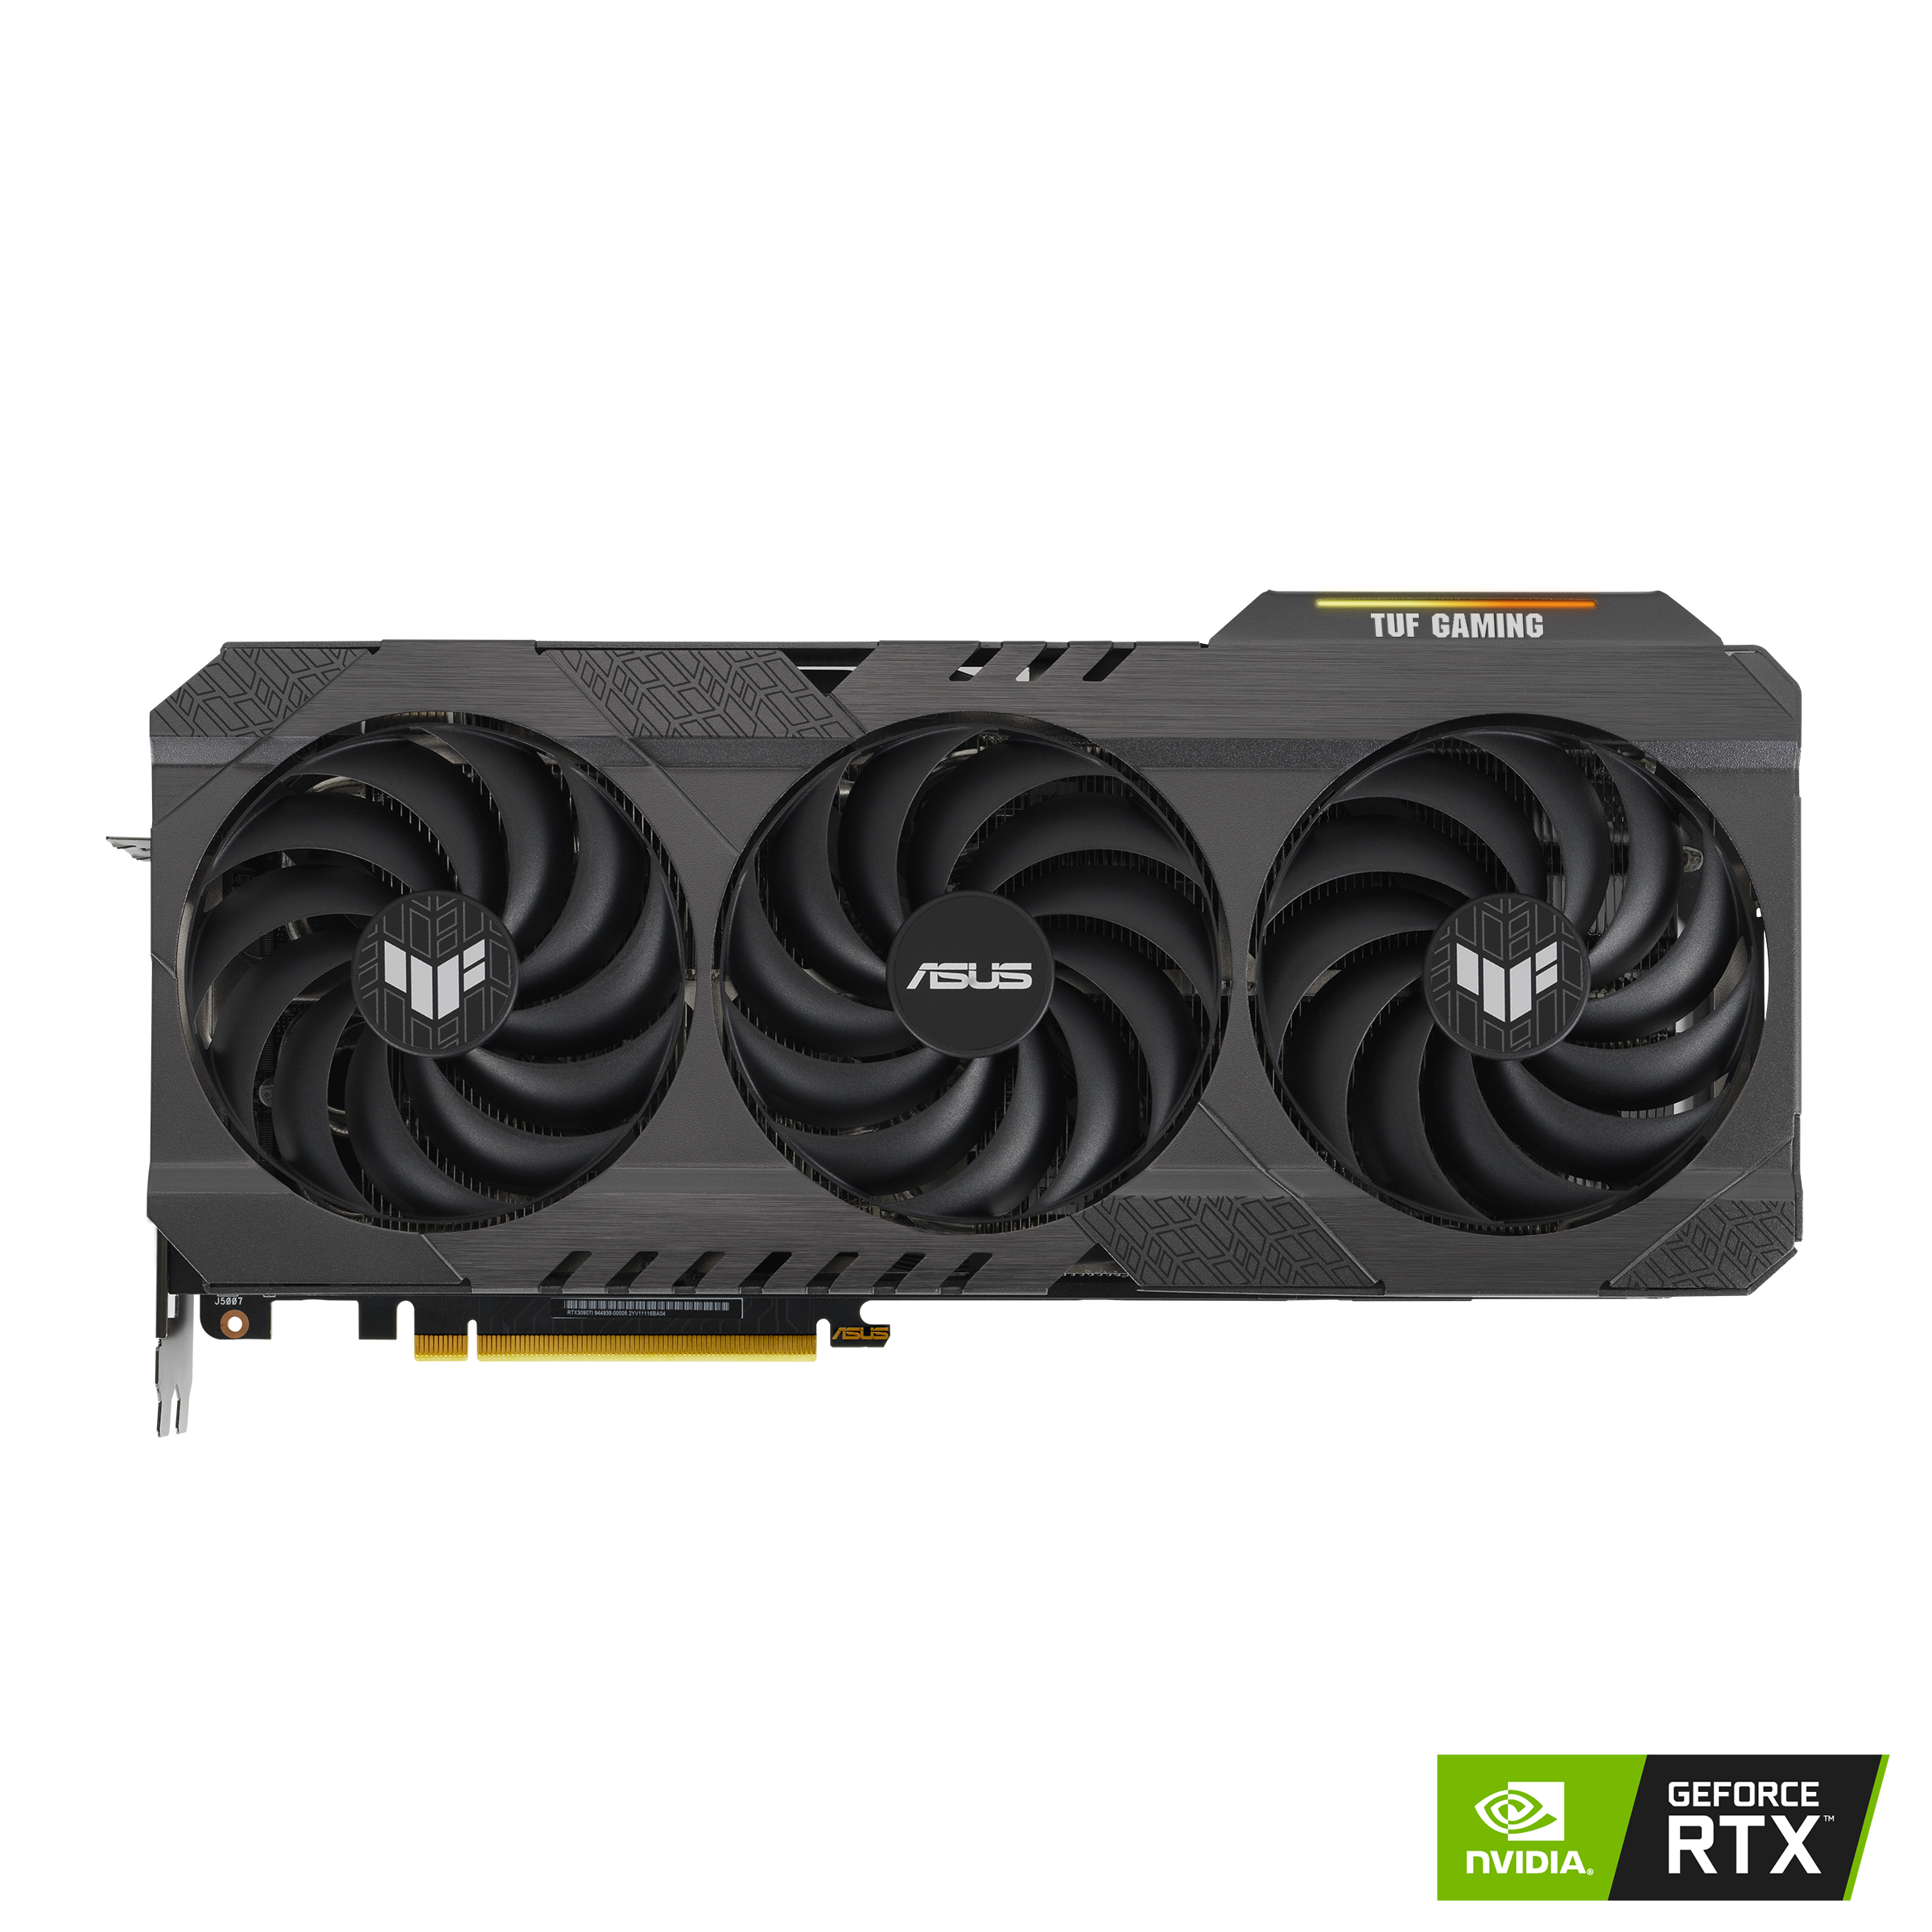 NVidia GeForce RTX 3090 Founders Edition 24GB GDDR6 Geforce RTX 3090 FE  Video Graphic Card 